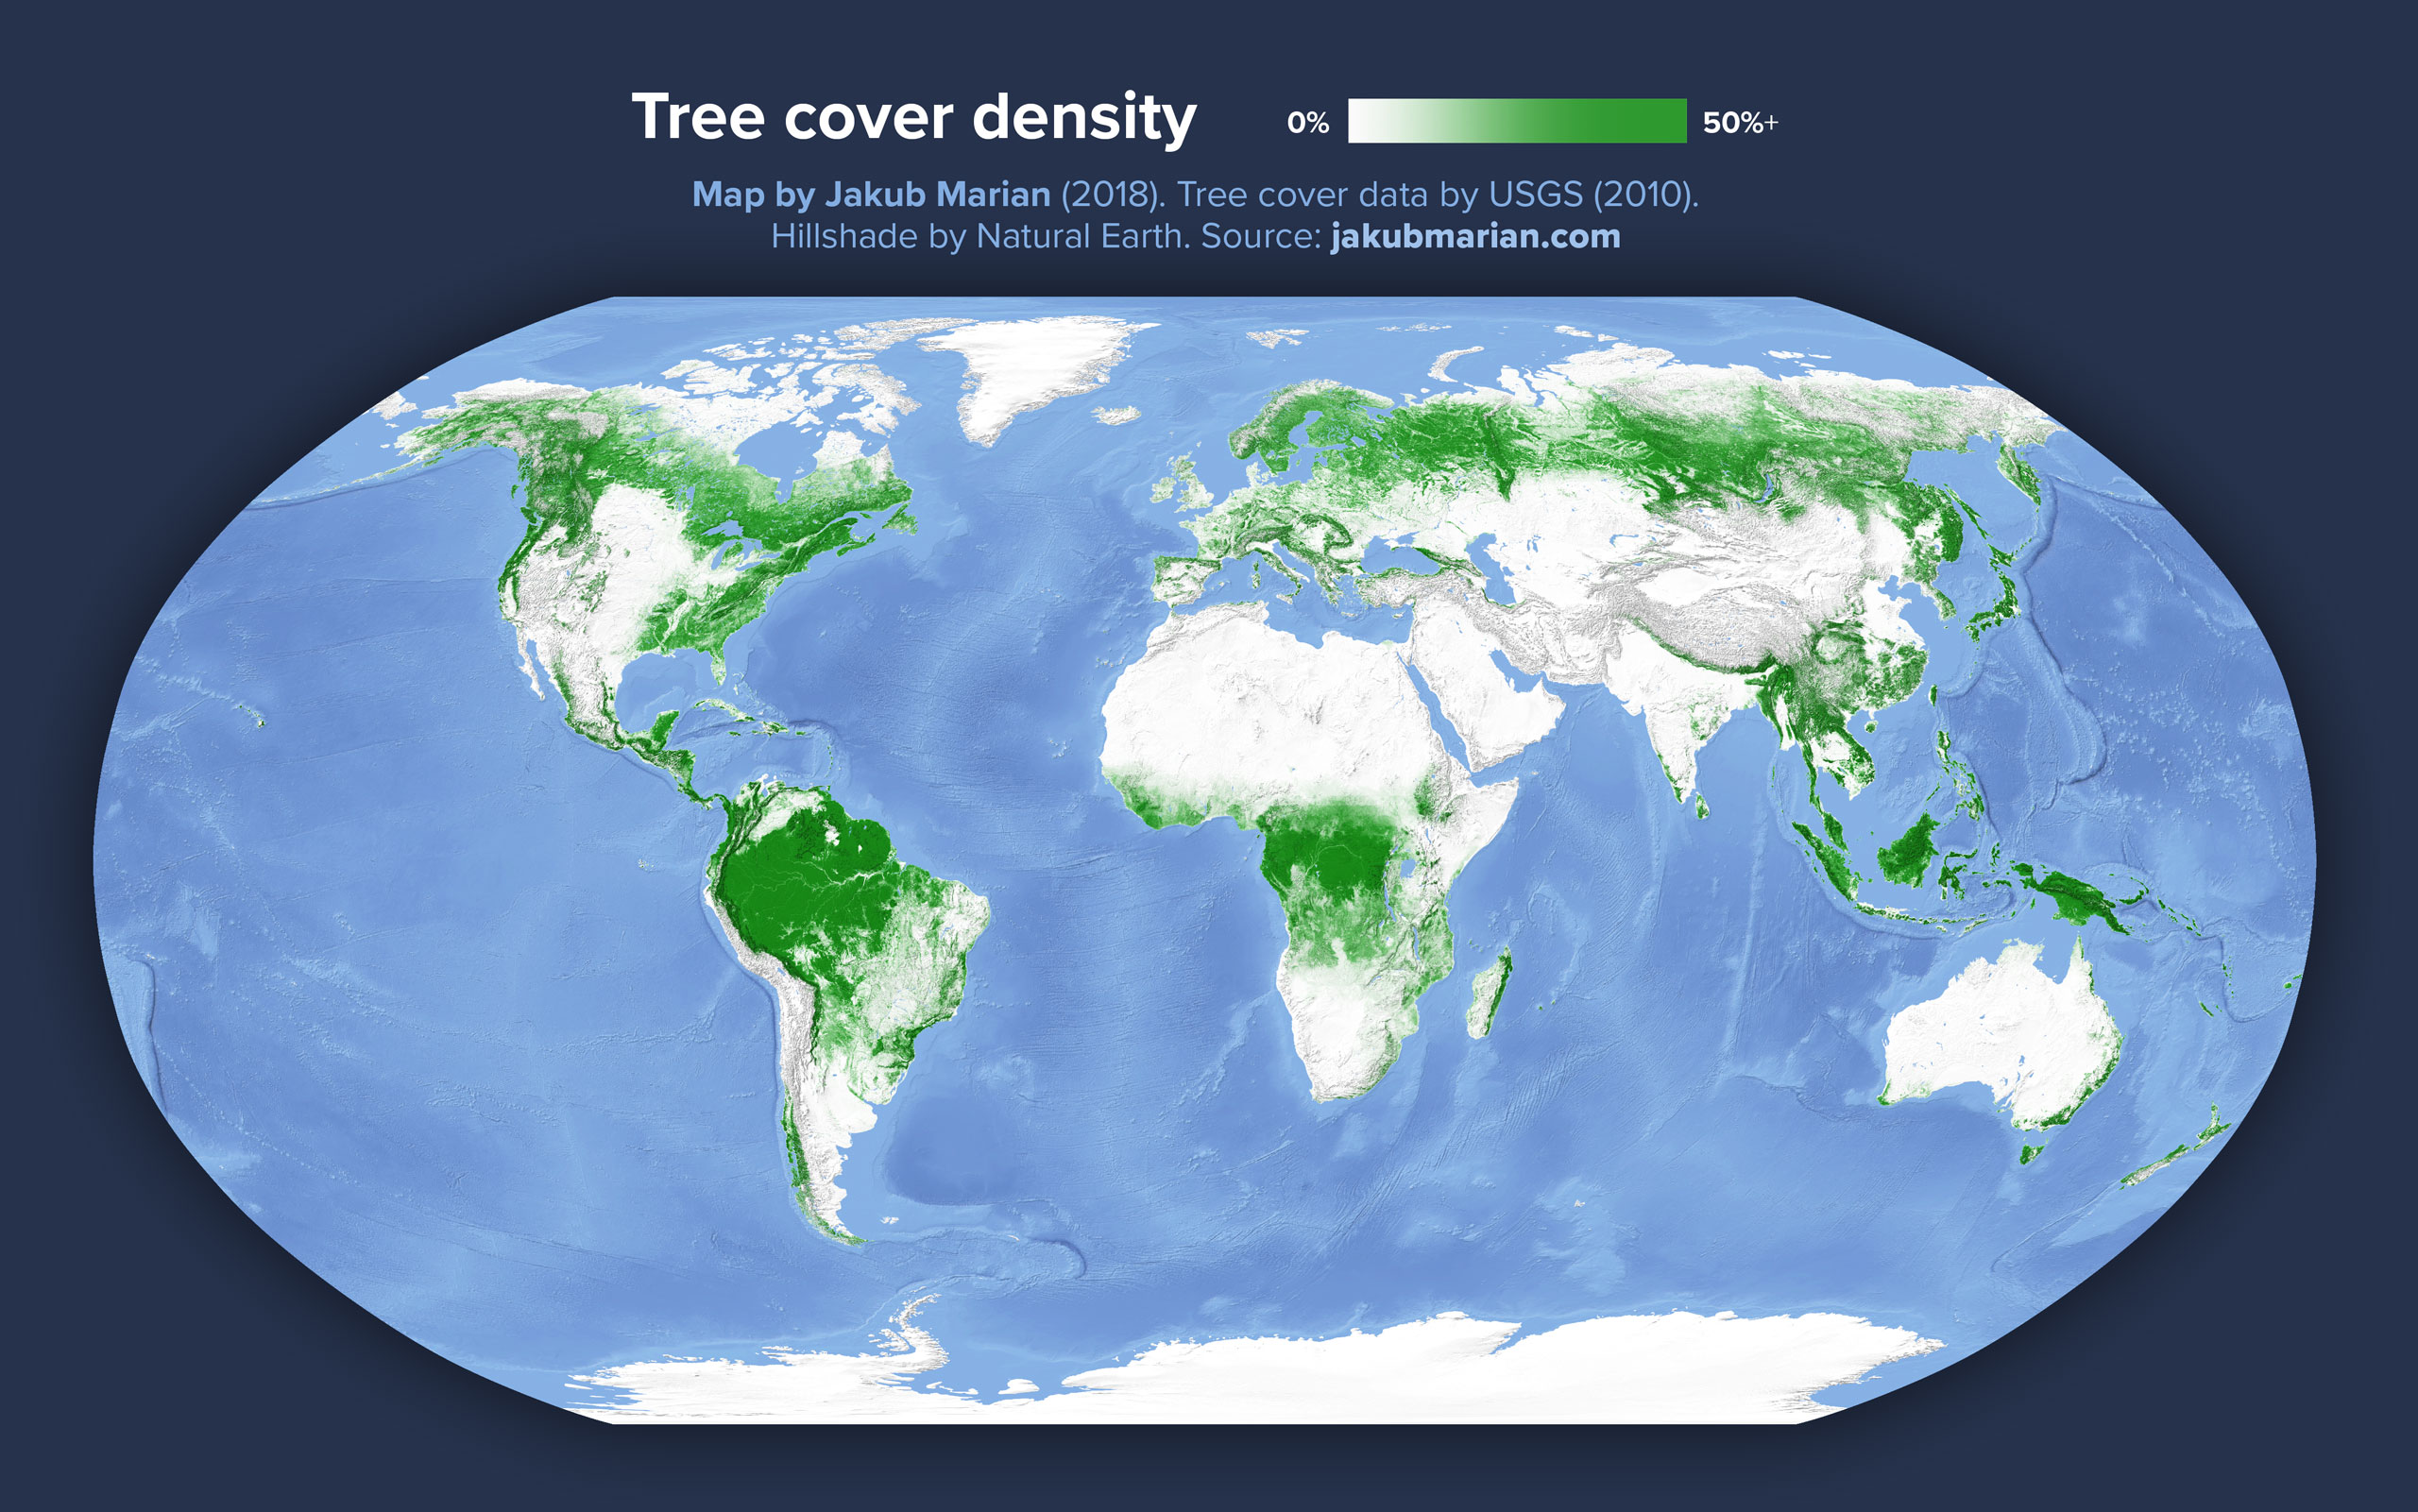 Tree cover of the world